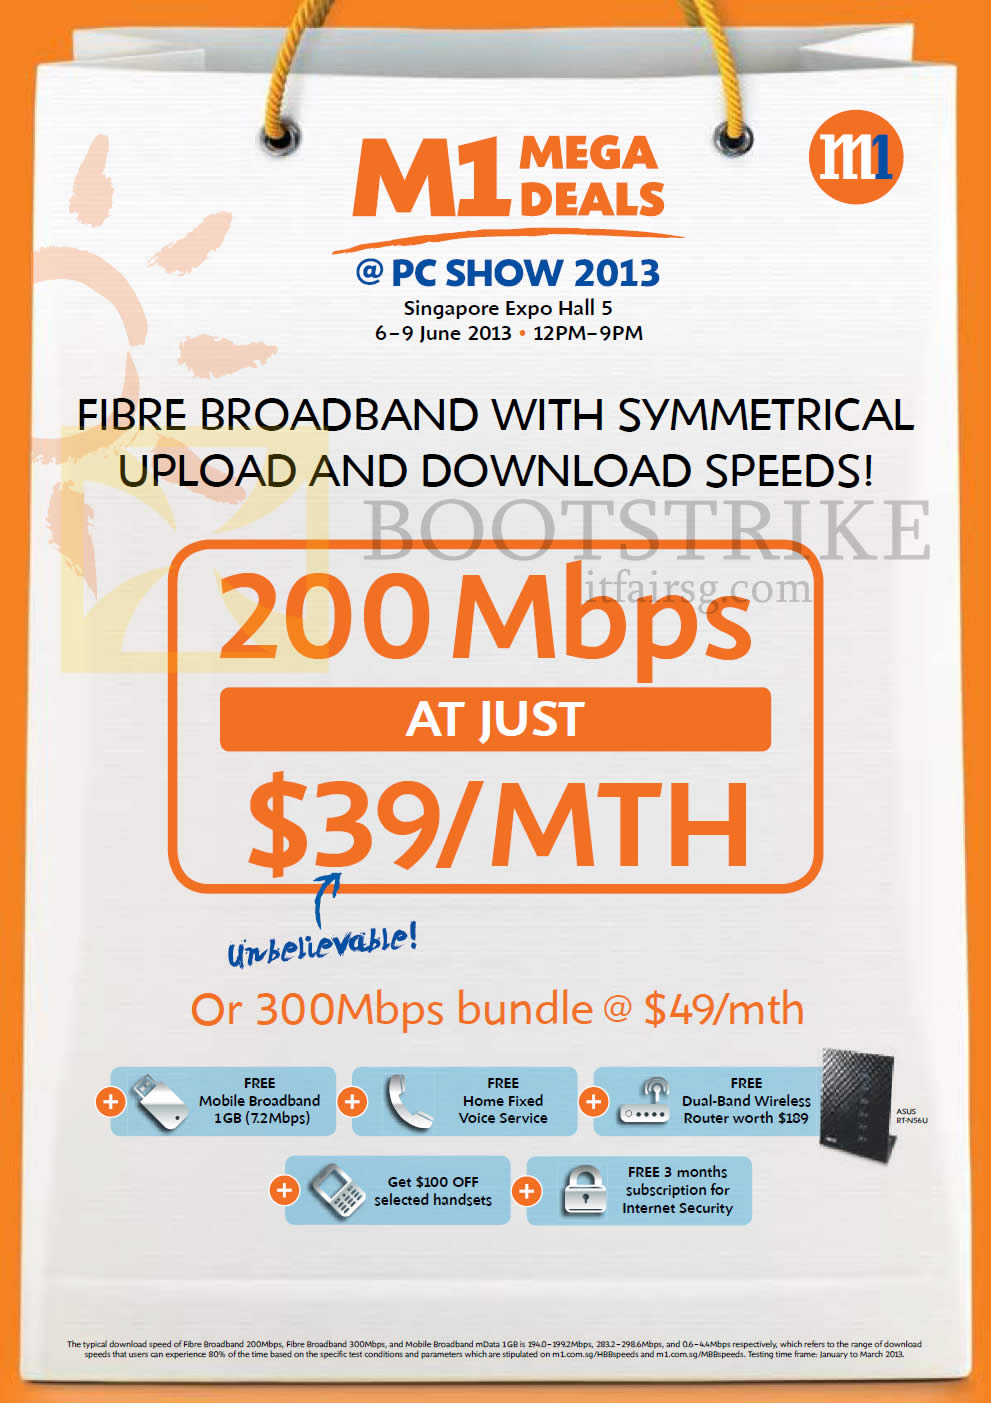 Featured image for M1 PC SHOW 2013 Smartphones, Tablets & Home/Mobile Broadband Offers 6 - 9 Jun 2013